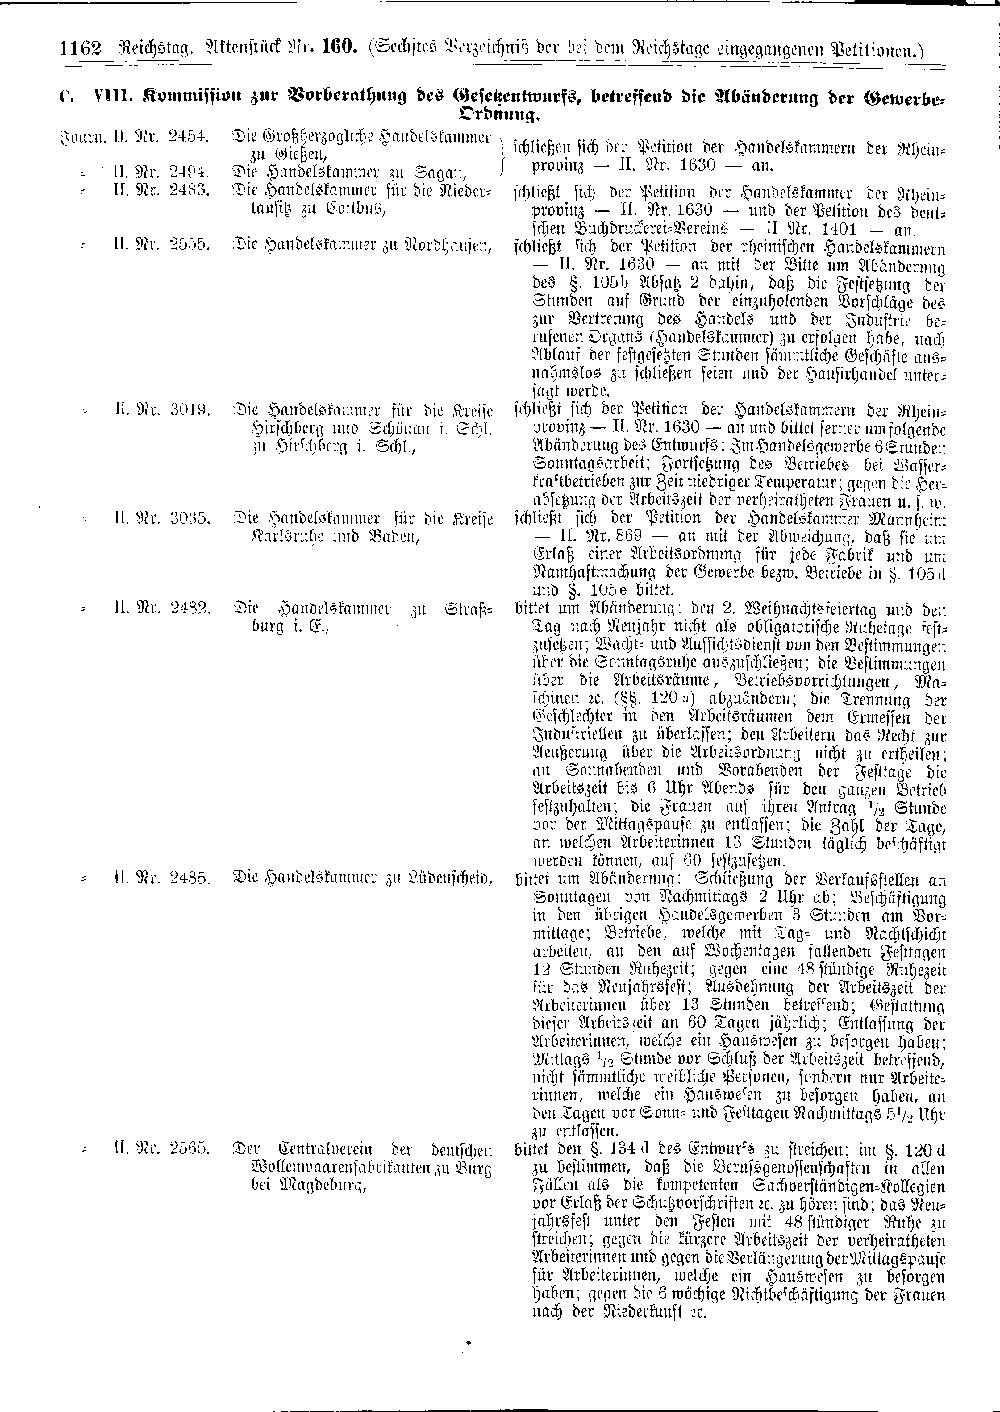 Scan of page 1162